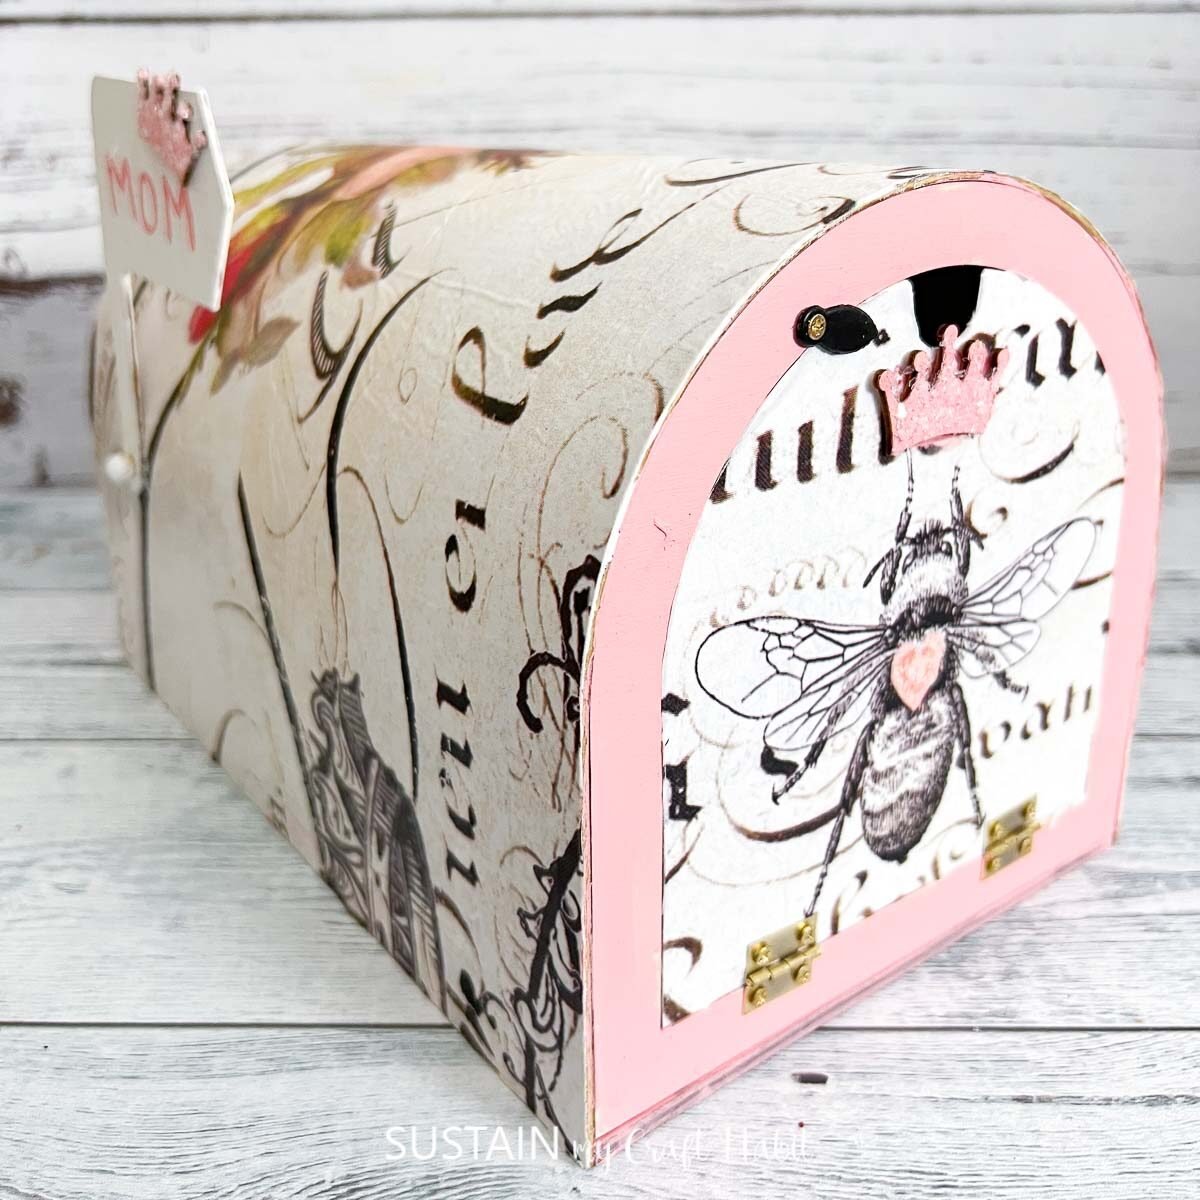 Memory mailbox painted pink and decoupaged with decorative paper.